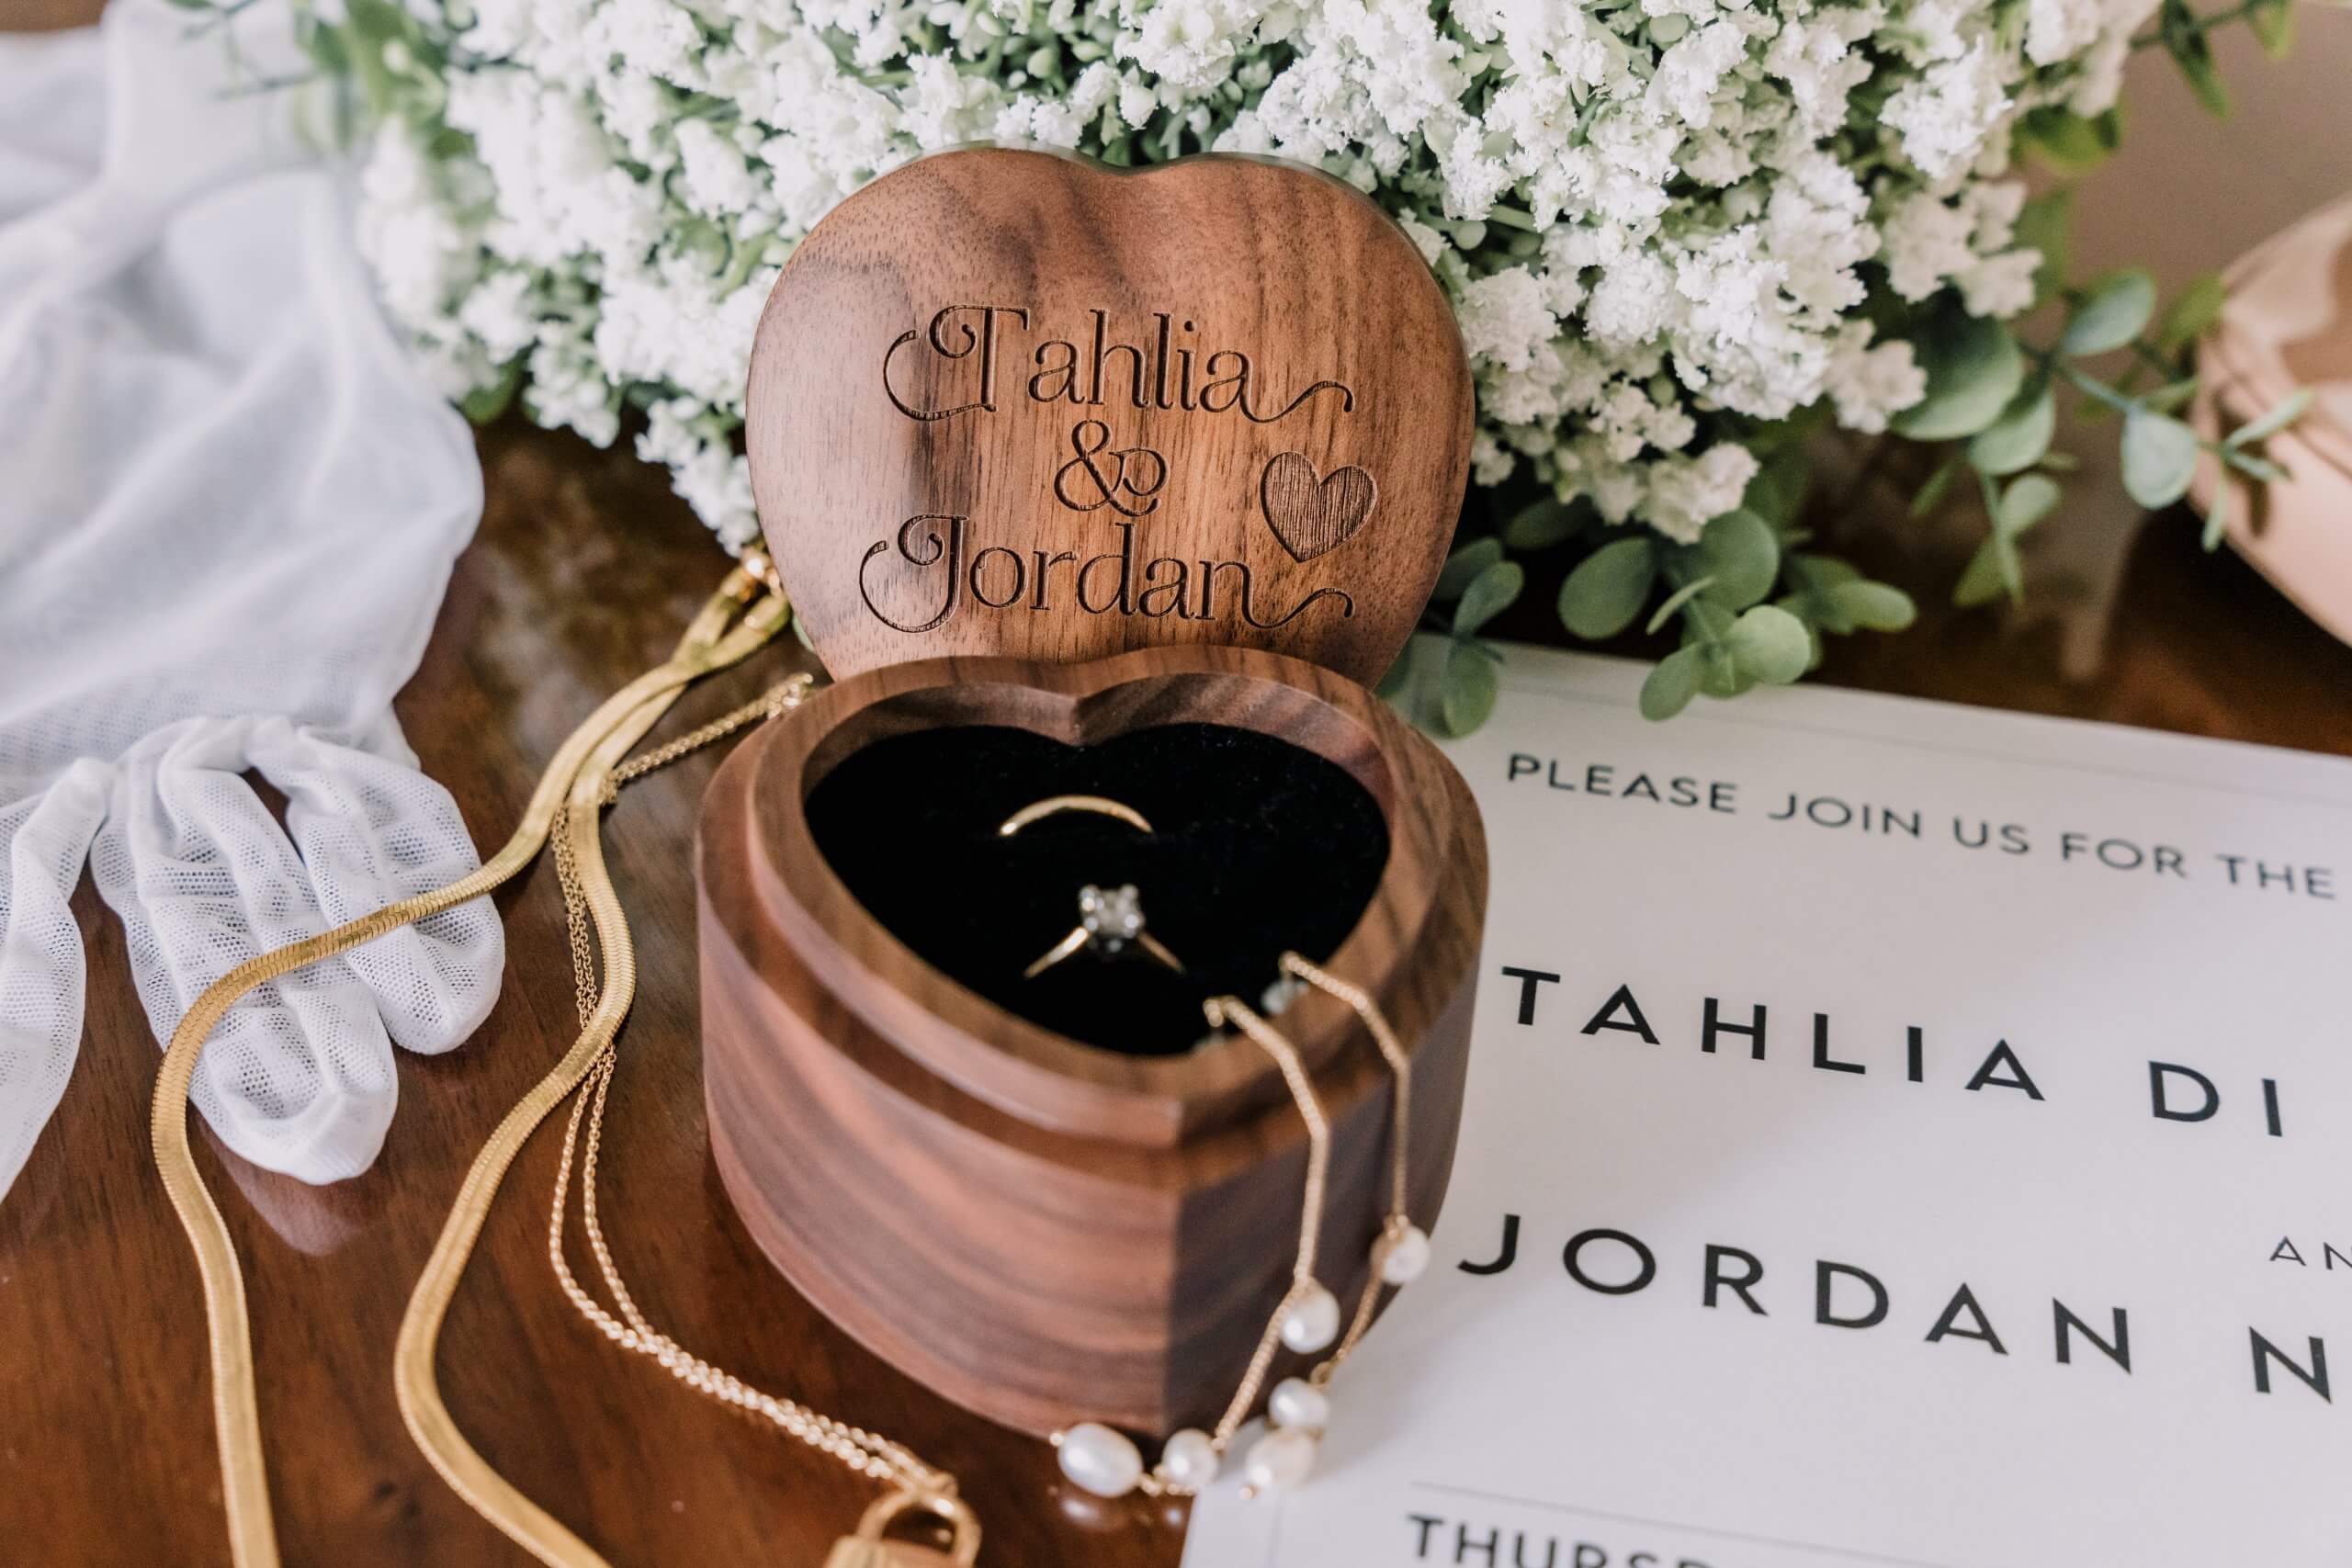 Wedding details - a wooden ring box, accessories, white babies breath, wedding invitation and white lace gloves.